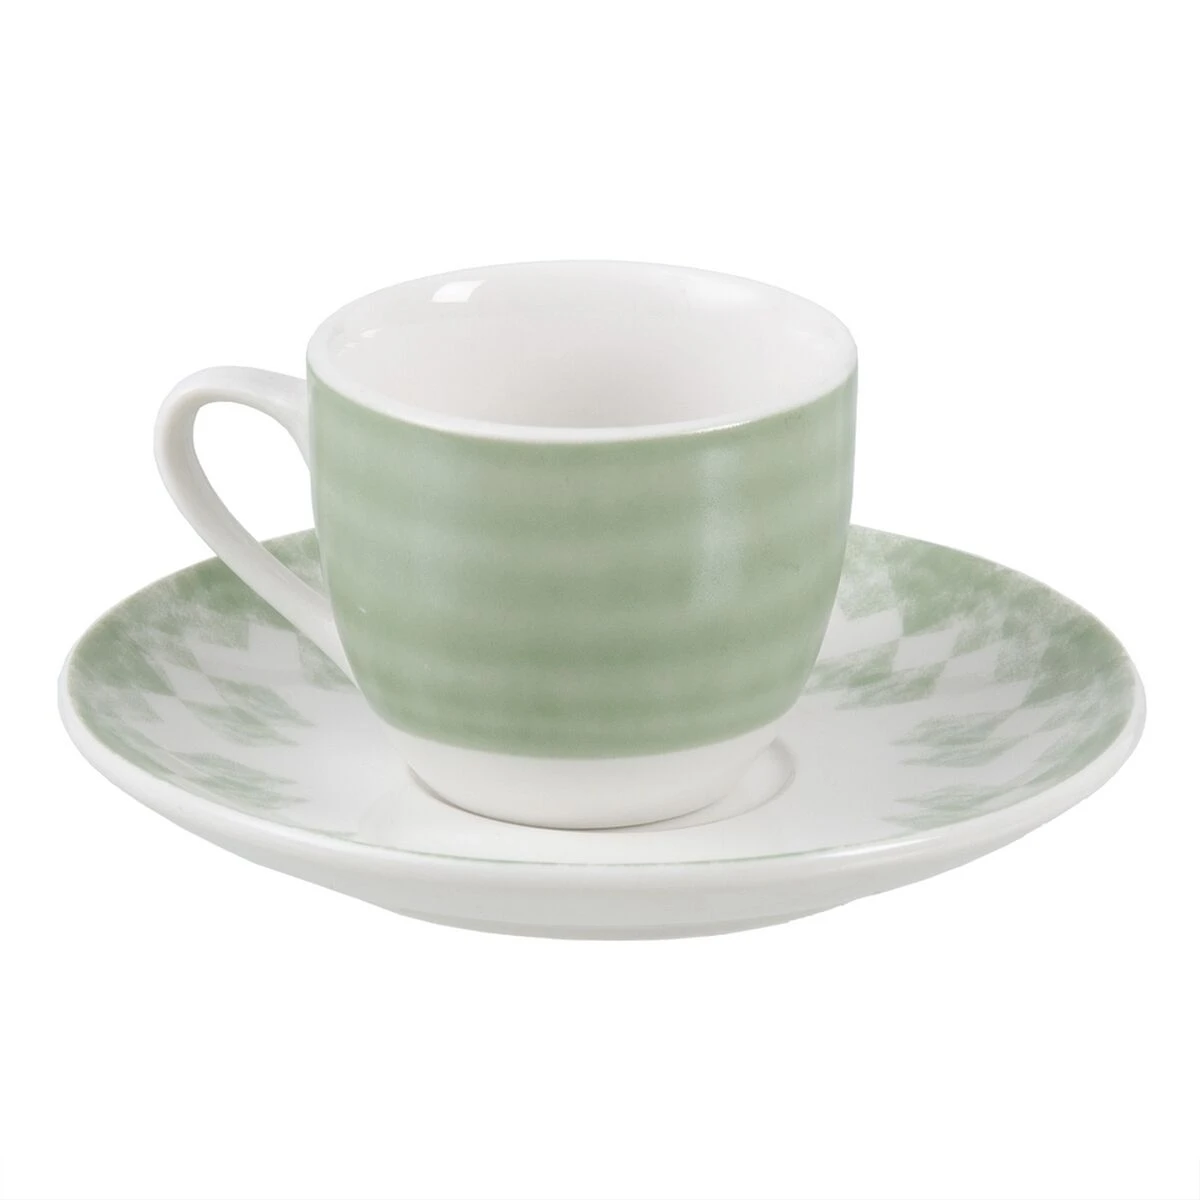 Green cup on saucer.